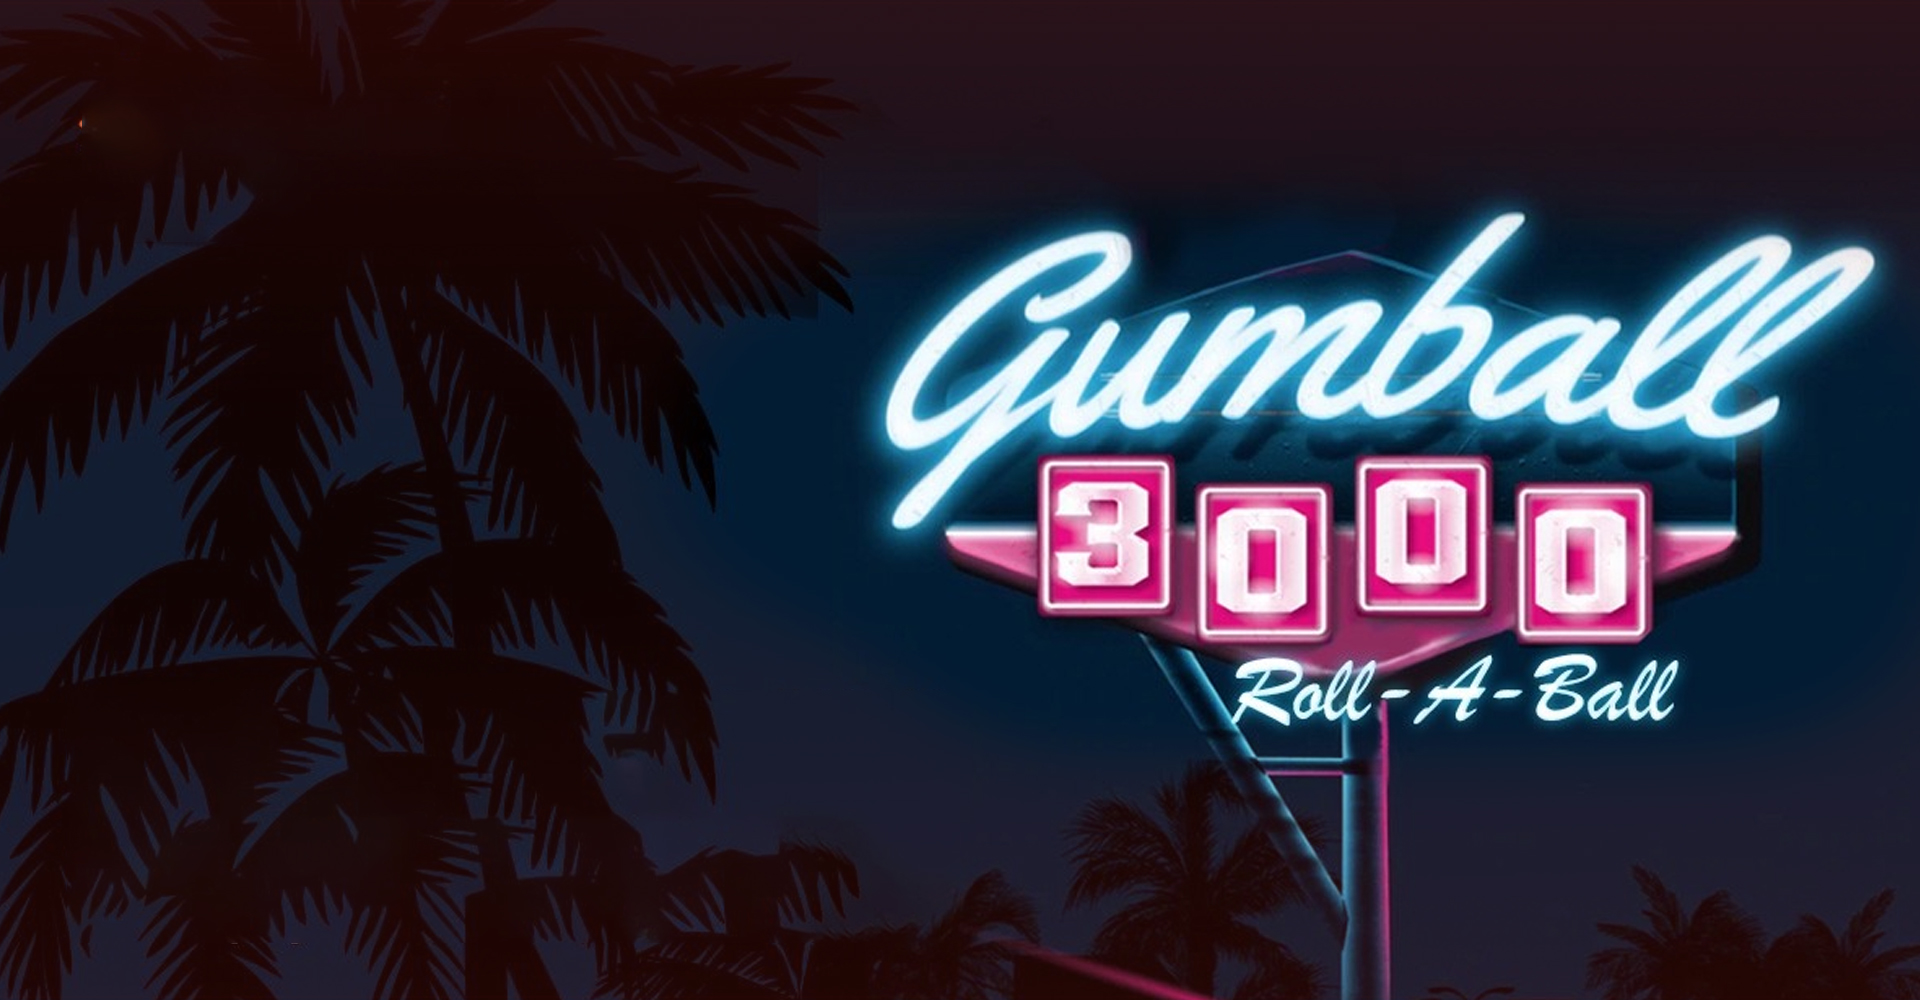 Play the Gumball 3000 Roll-A-Ball game and win big.